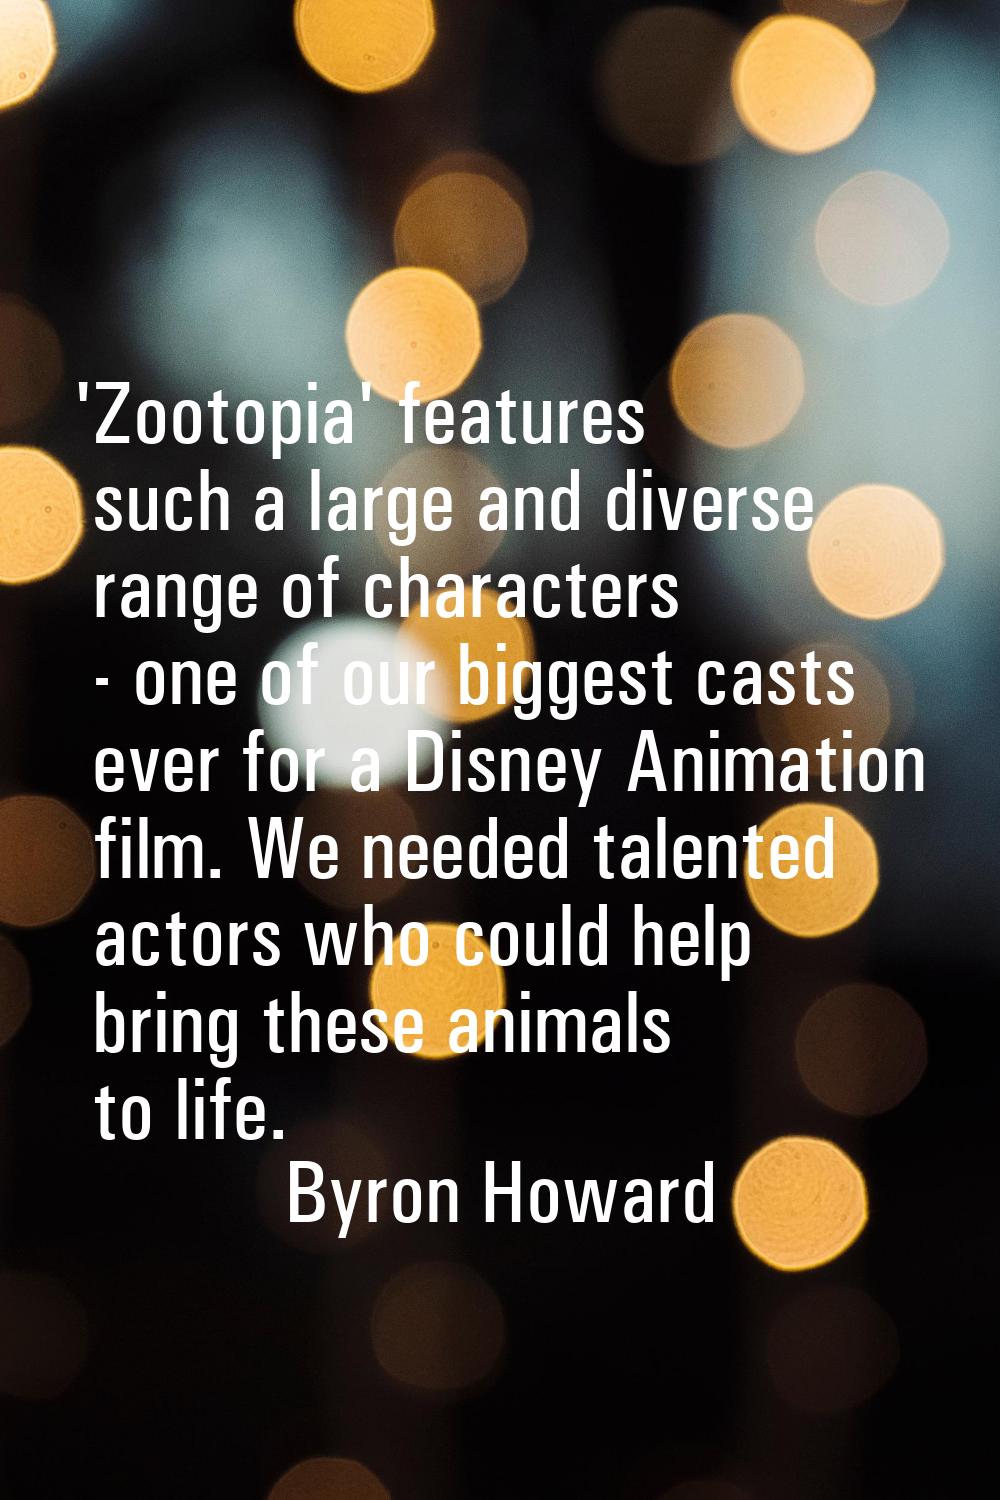 'Zootopia' features such a large and diverse range of characters - one of our biggest casts ever fo